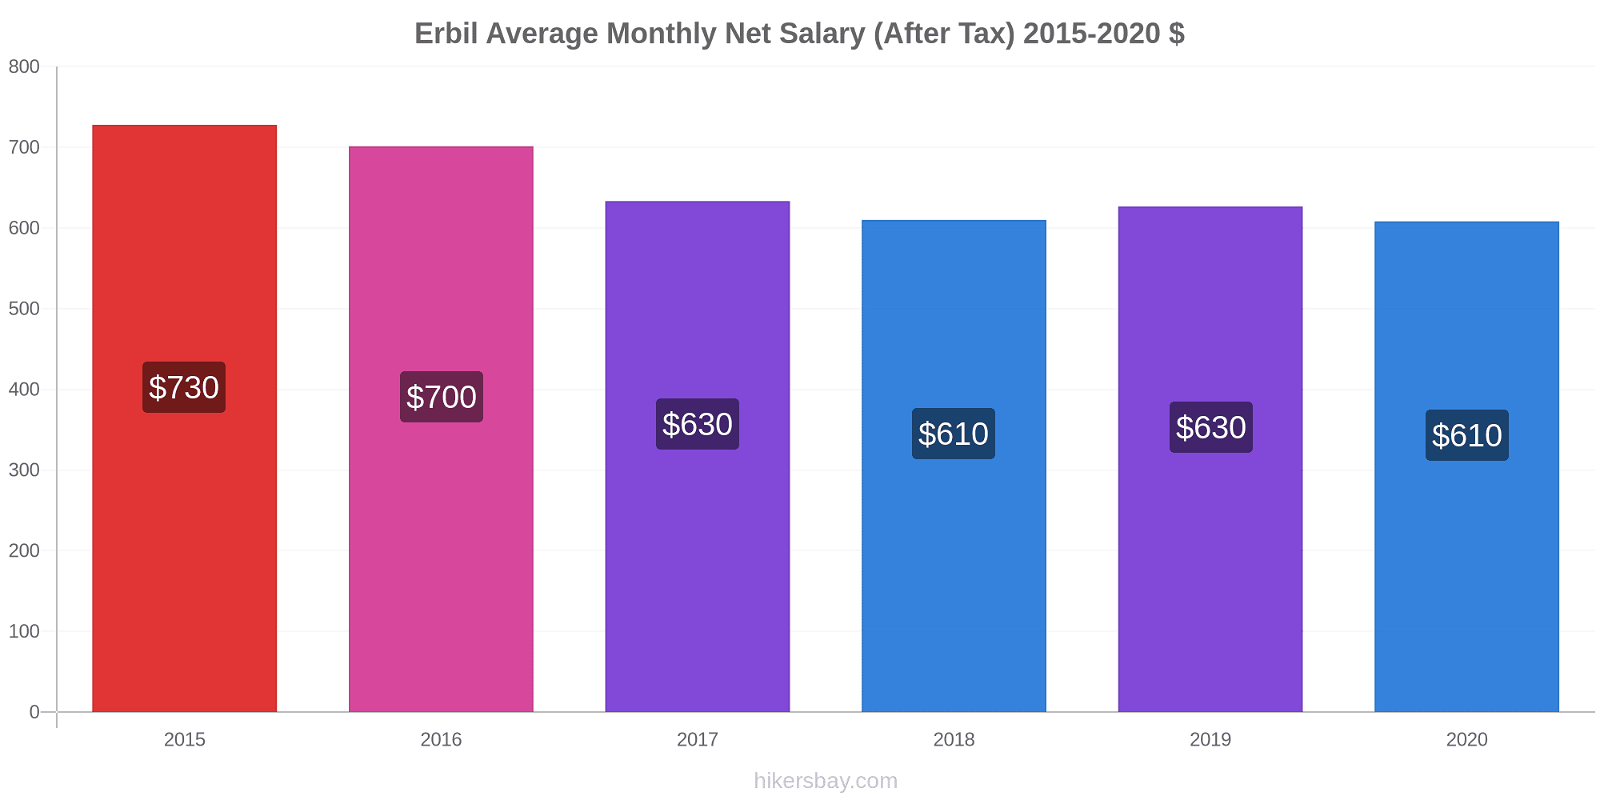 Erbil price changes Average Monthly Net Salary (After Tax) hikersbay.com